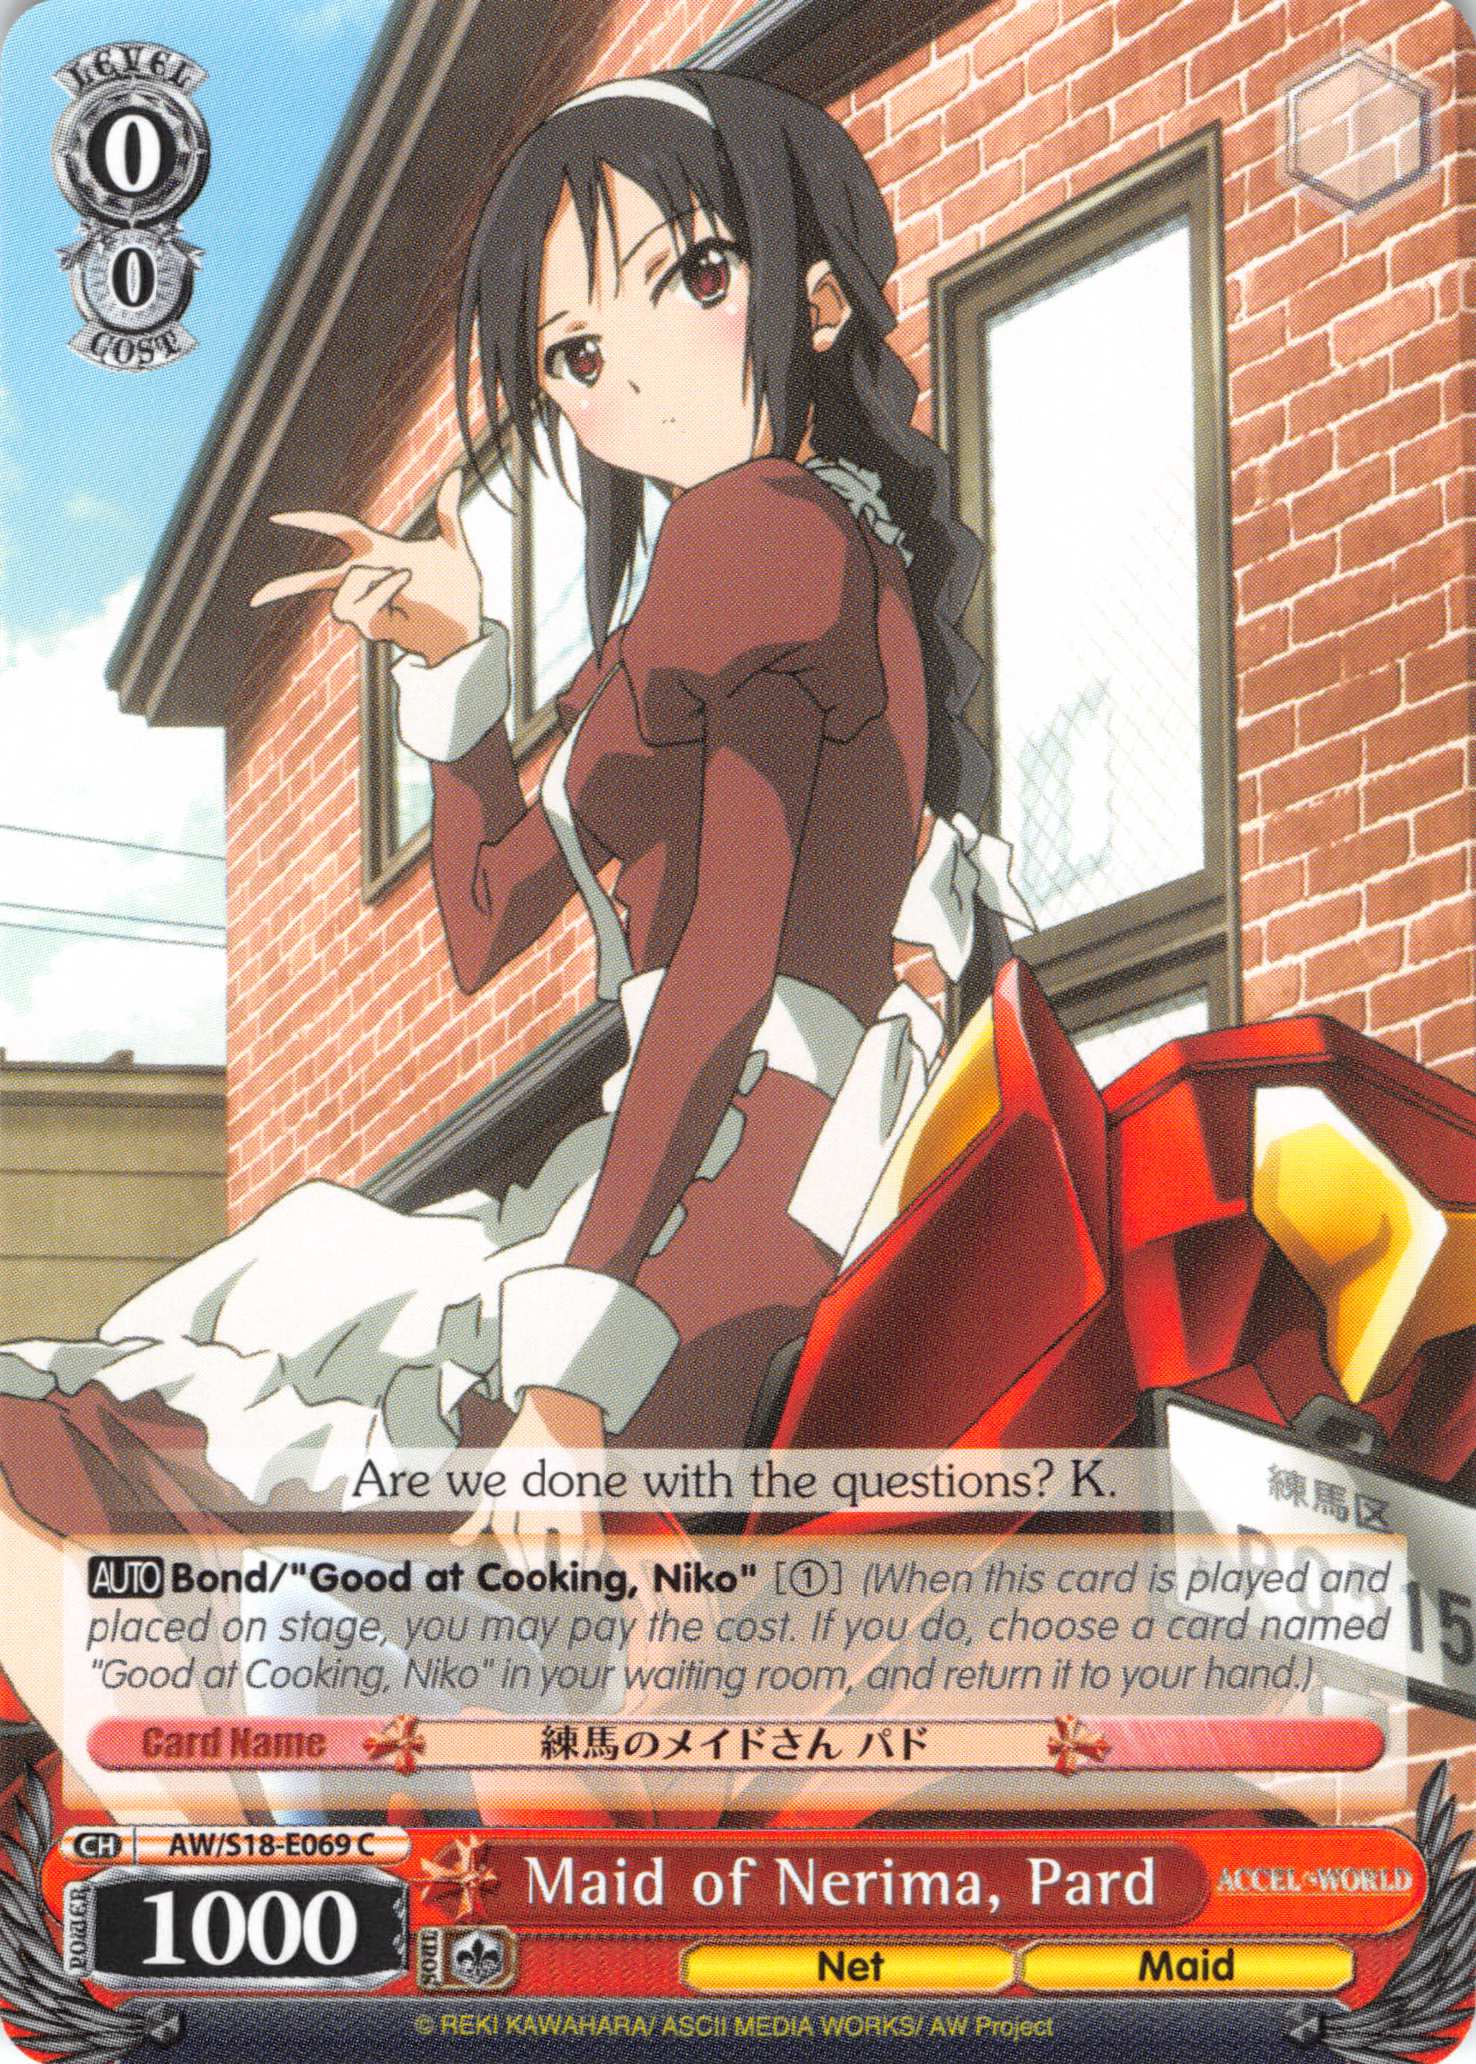 Maid of Nerima, Pard (AW/S18-E069 C) [Accel World]